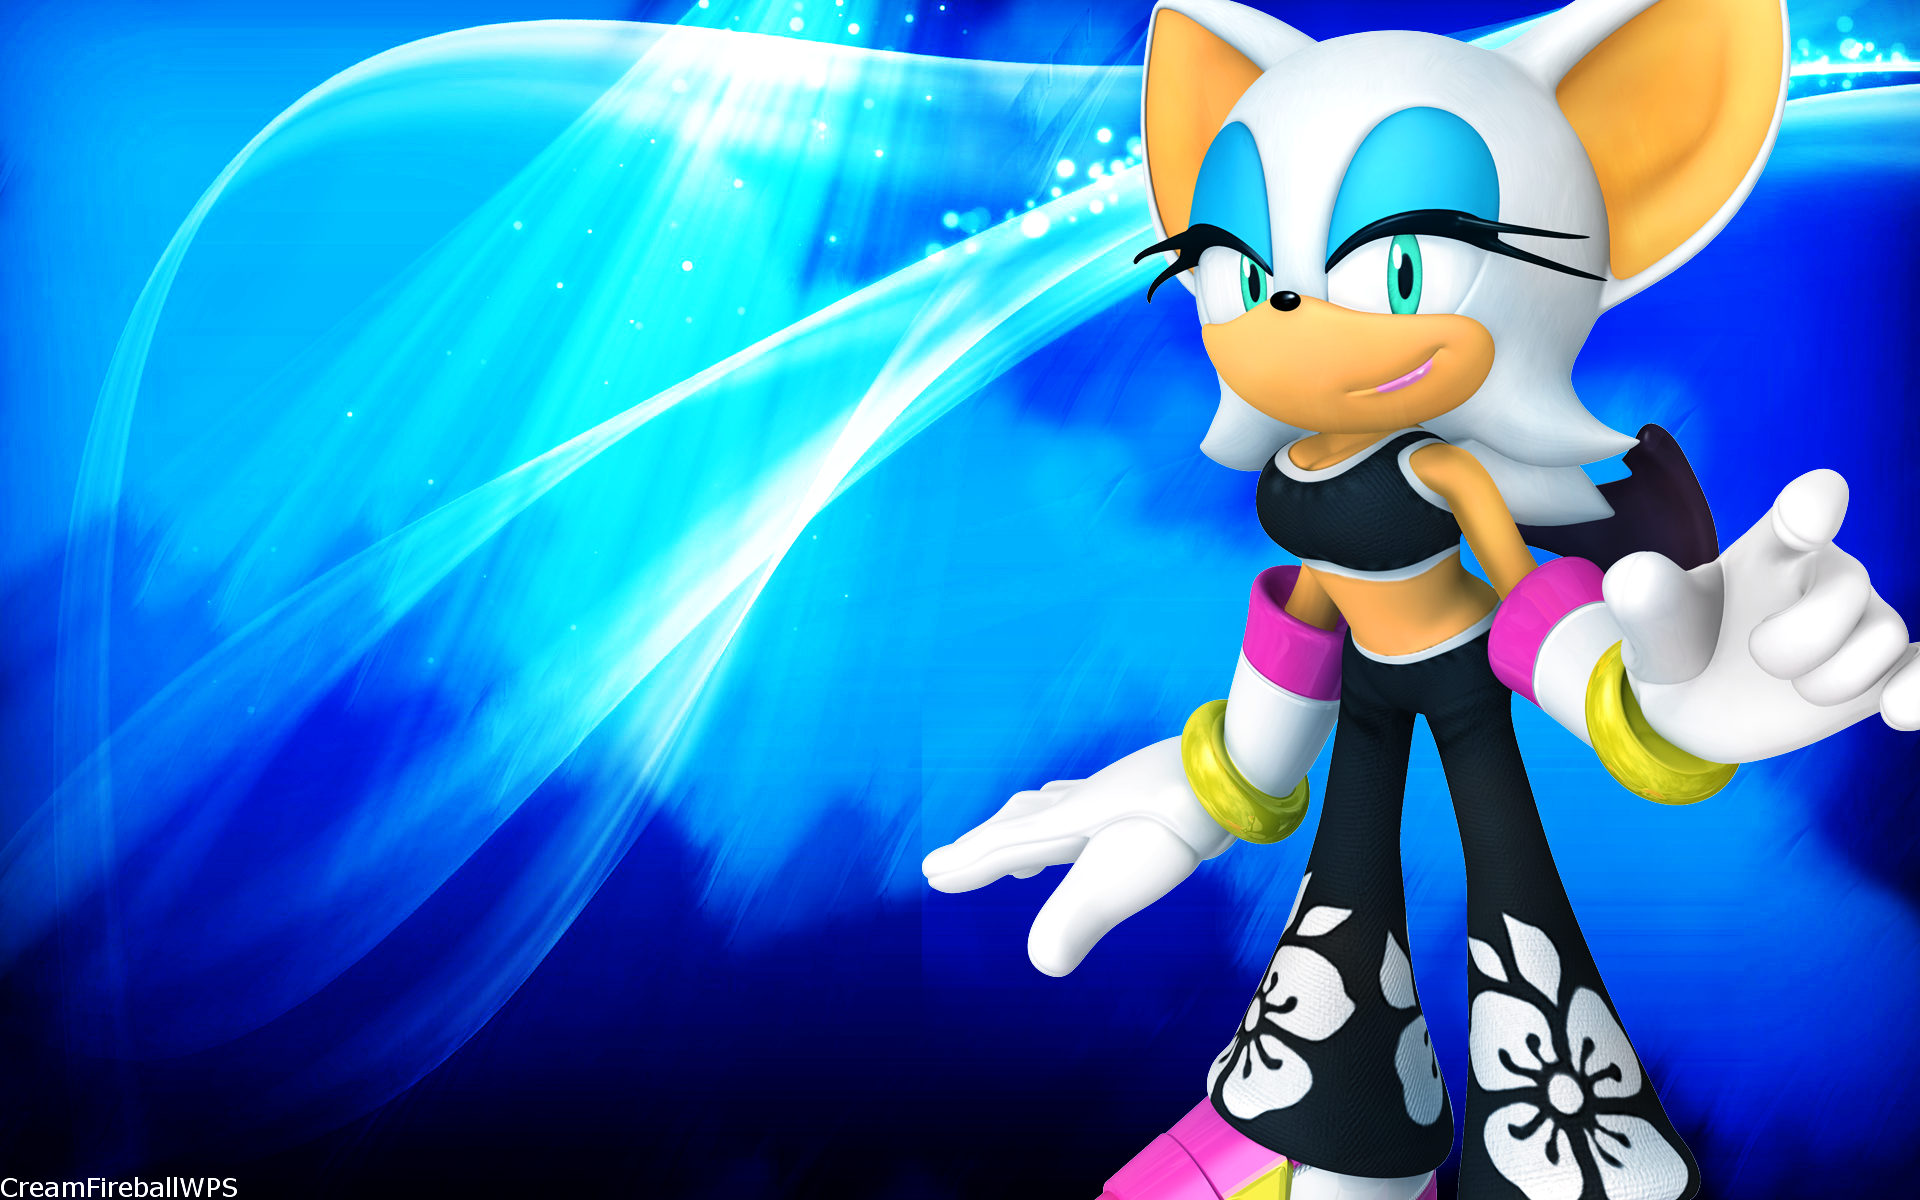 Video Game Sonic Free Riders HD Wallpaper | Background Image